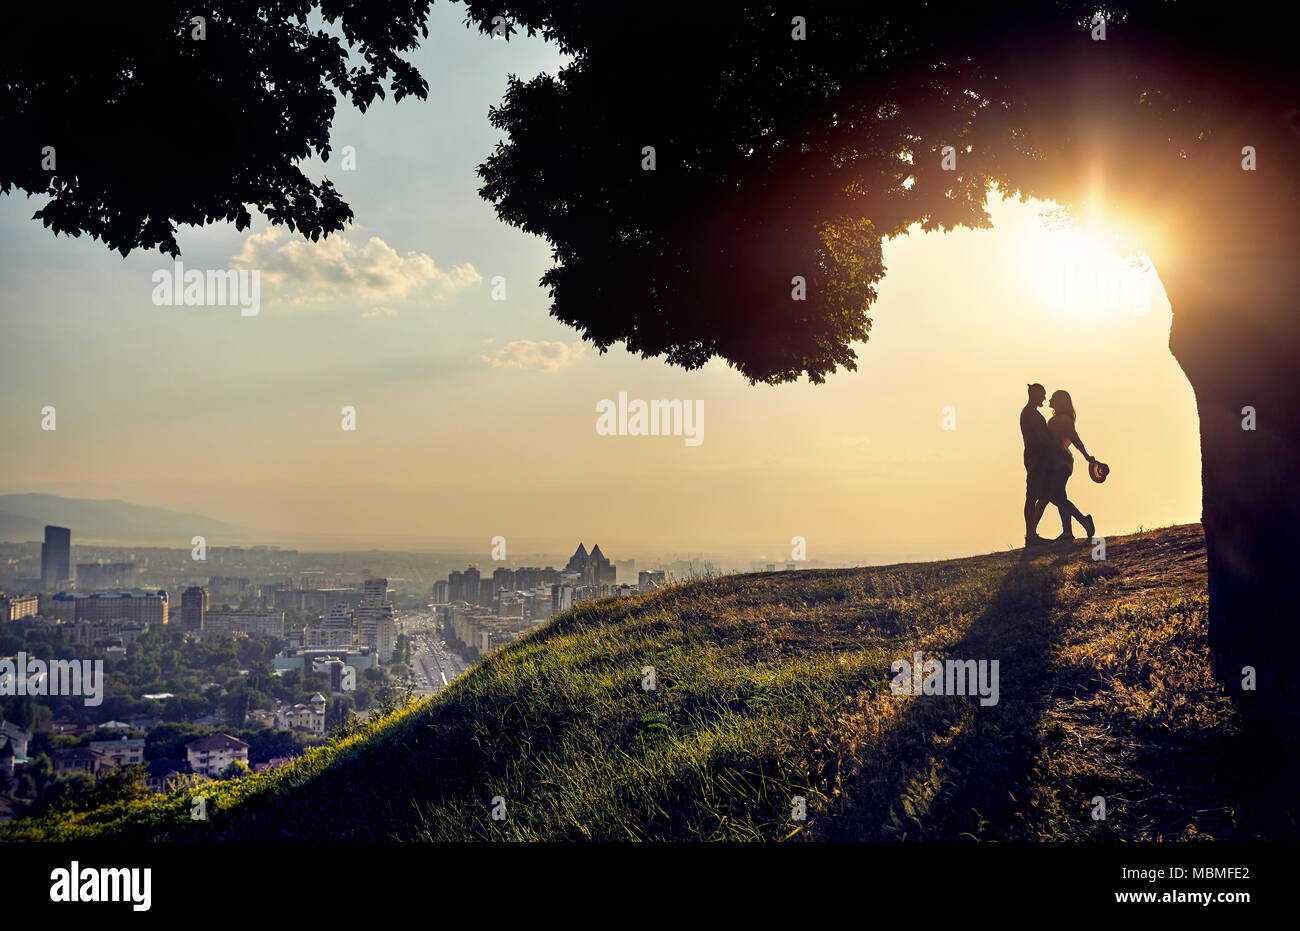 Yong couple in silhouette hugging and looking at the sunset city landscape Stock Photo